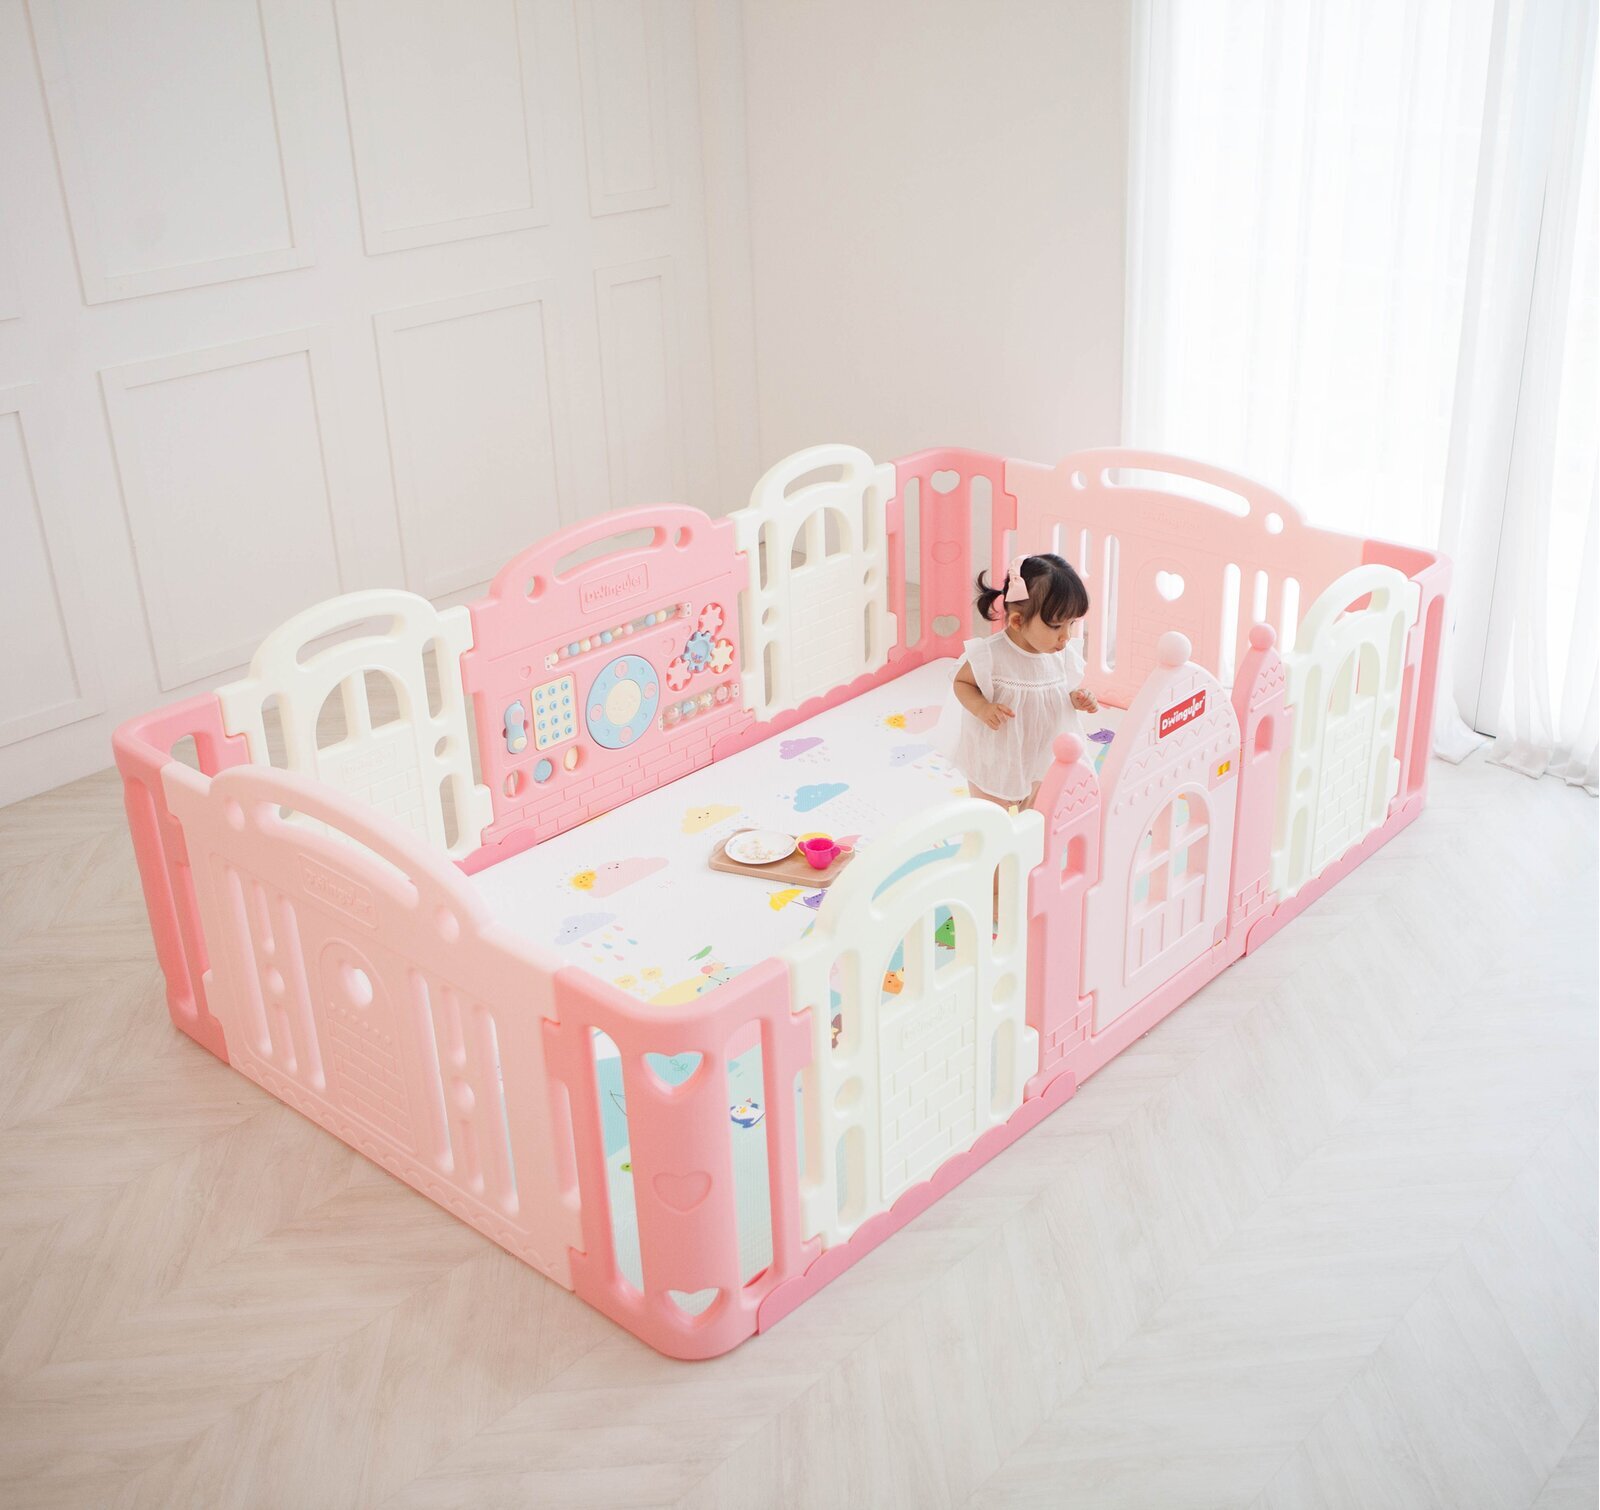 Biggest playpen for toddlers is a palace for your children